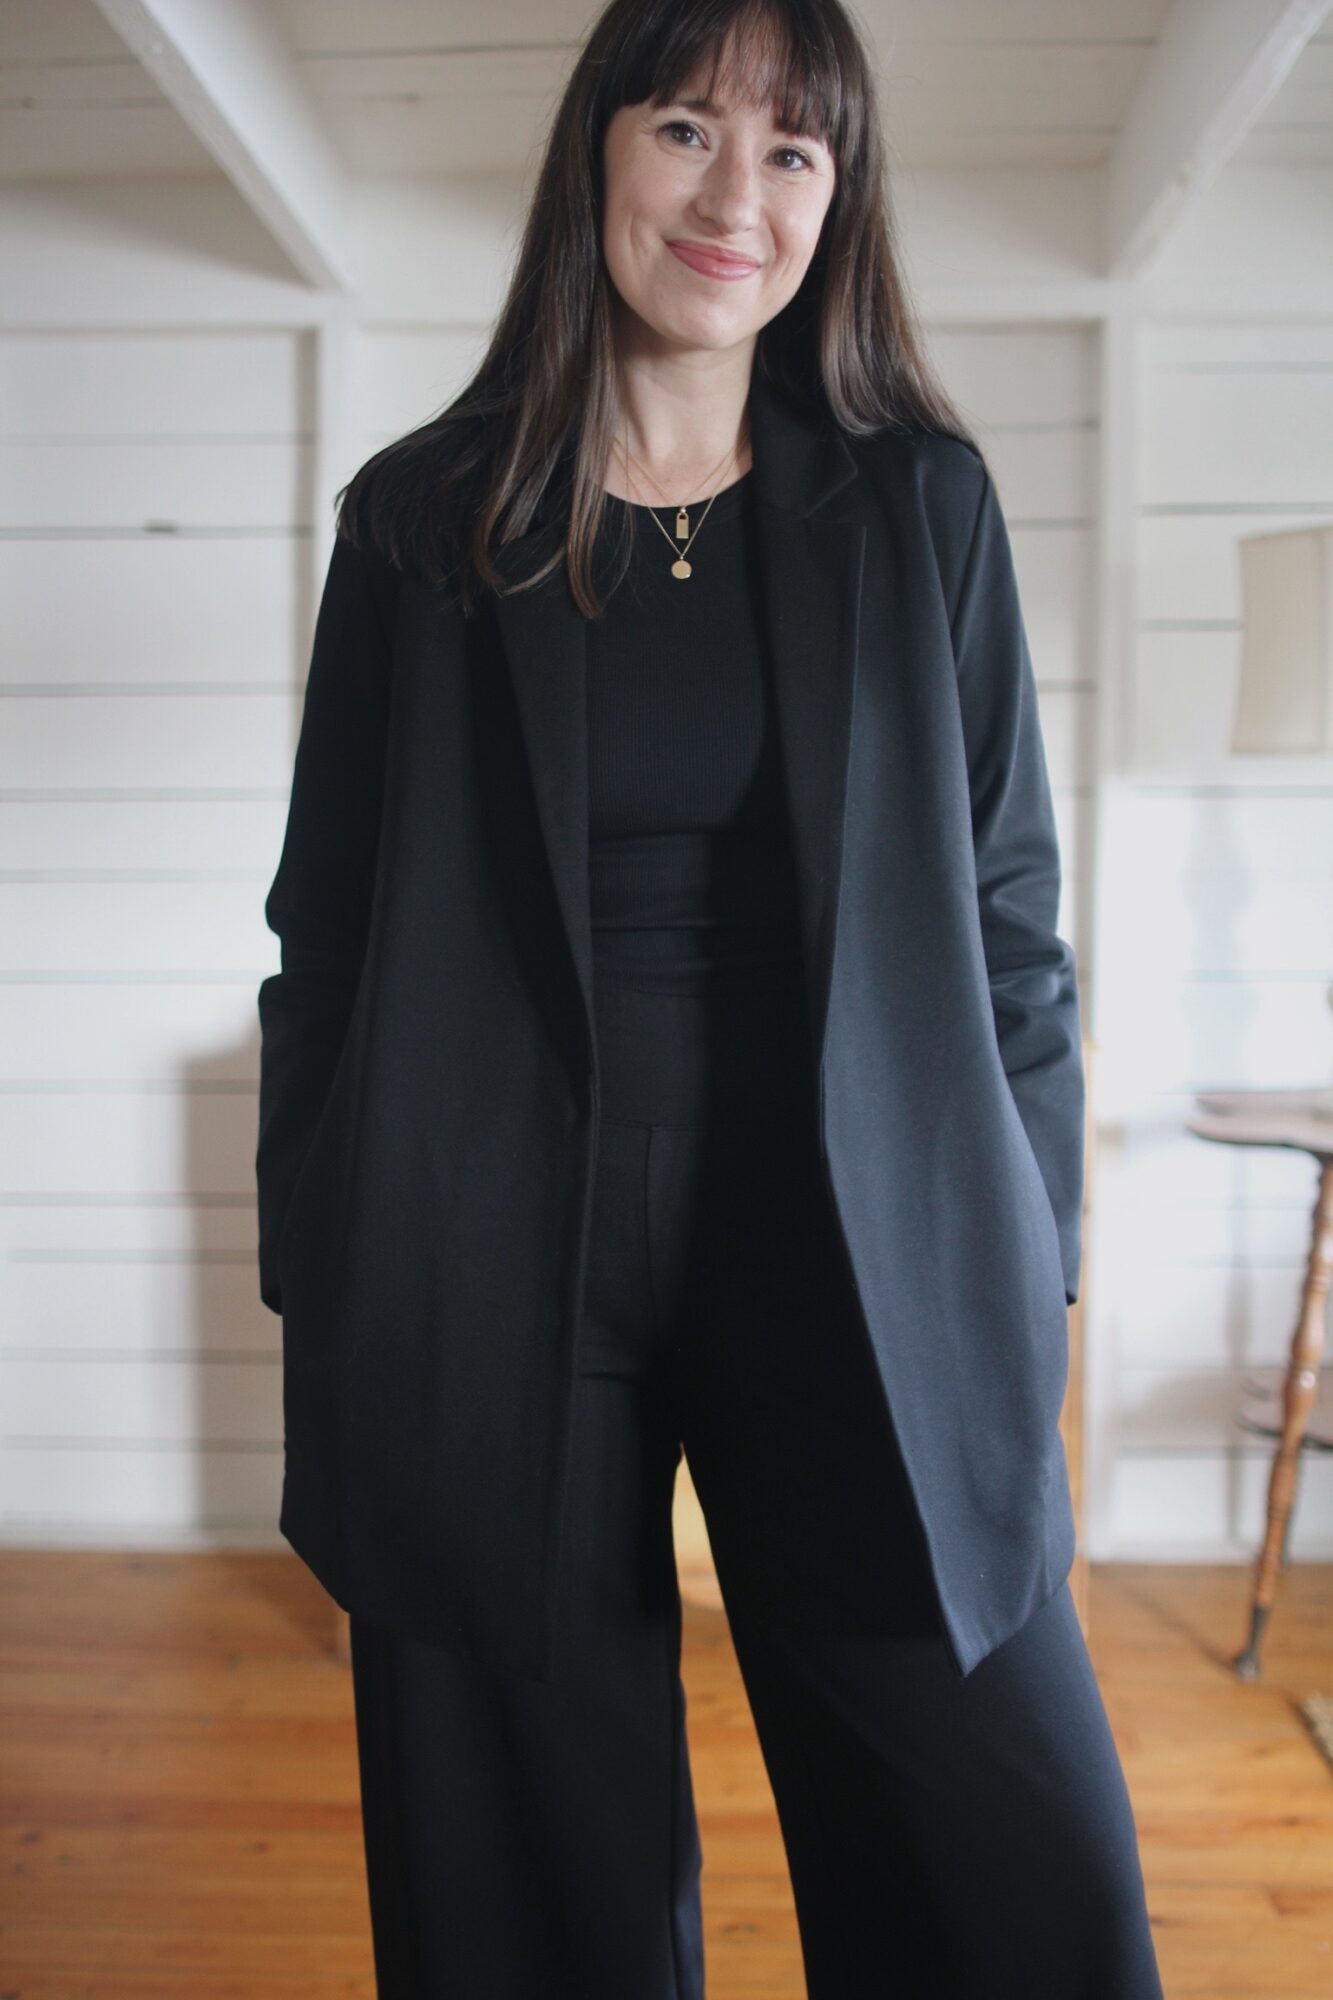 Style Bee - 3 WAYS TO WEAR BLACK THIS FALL & WINTER